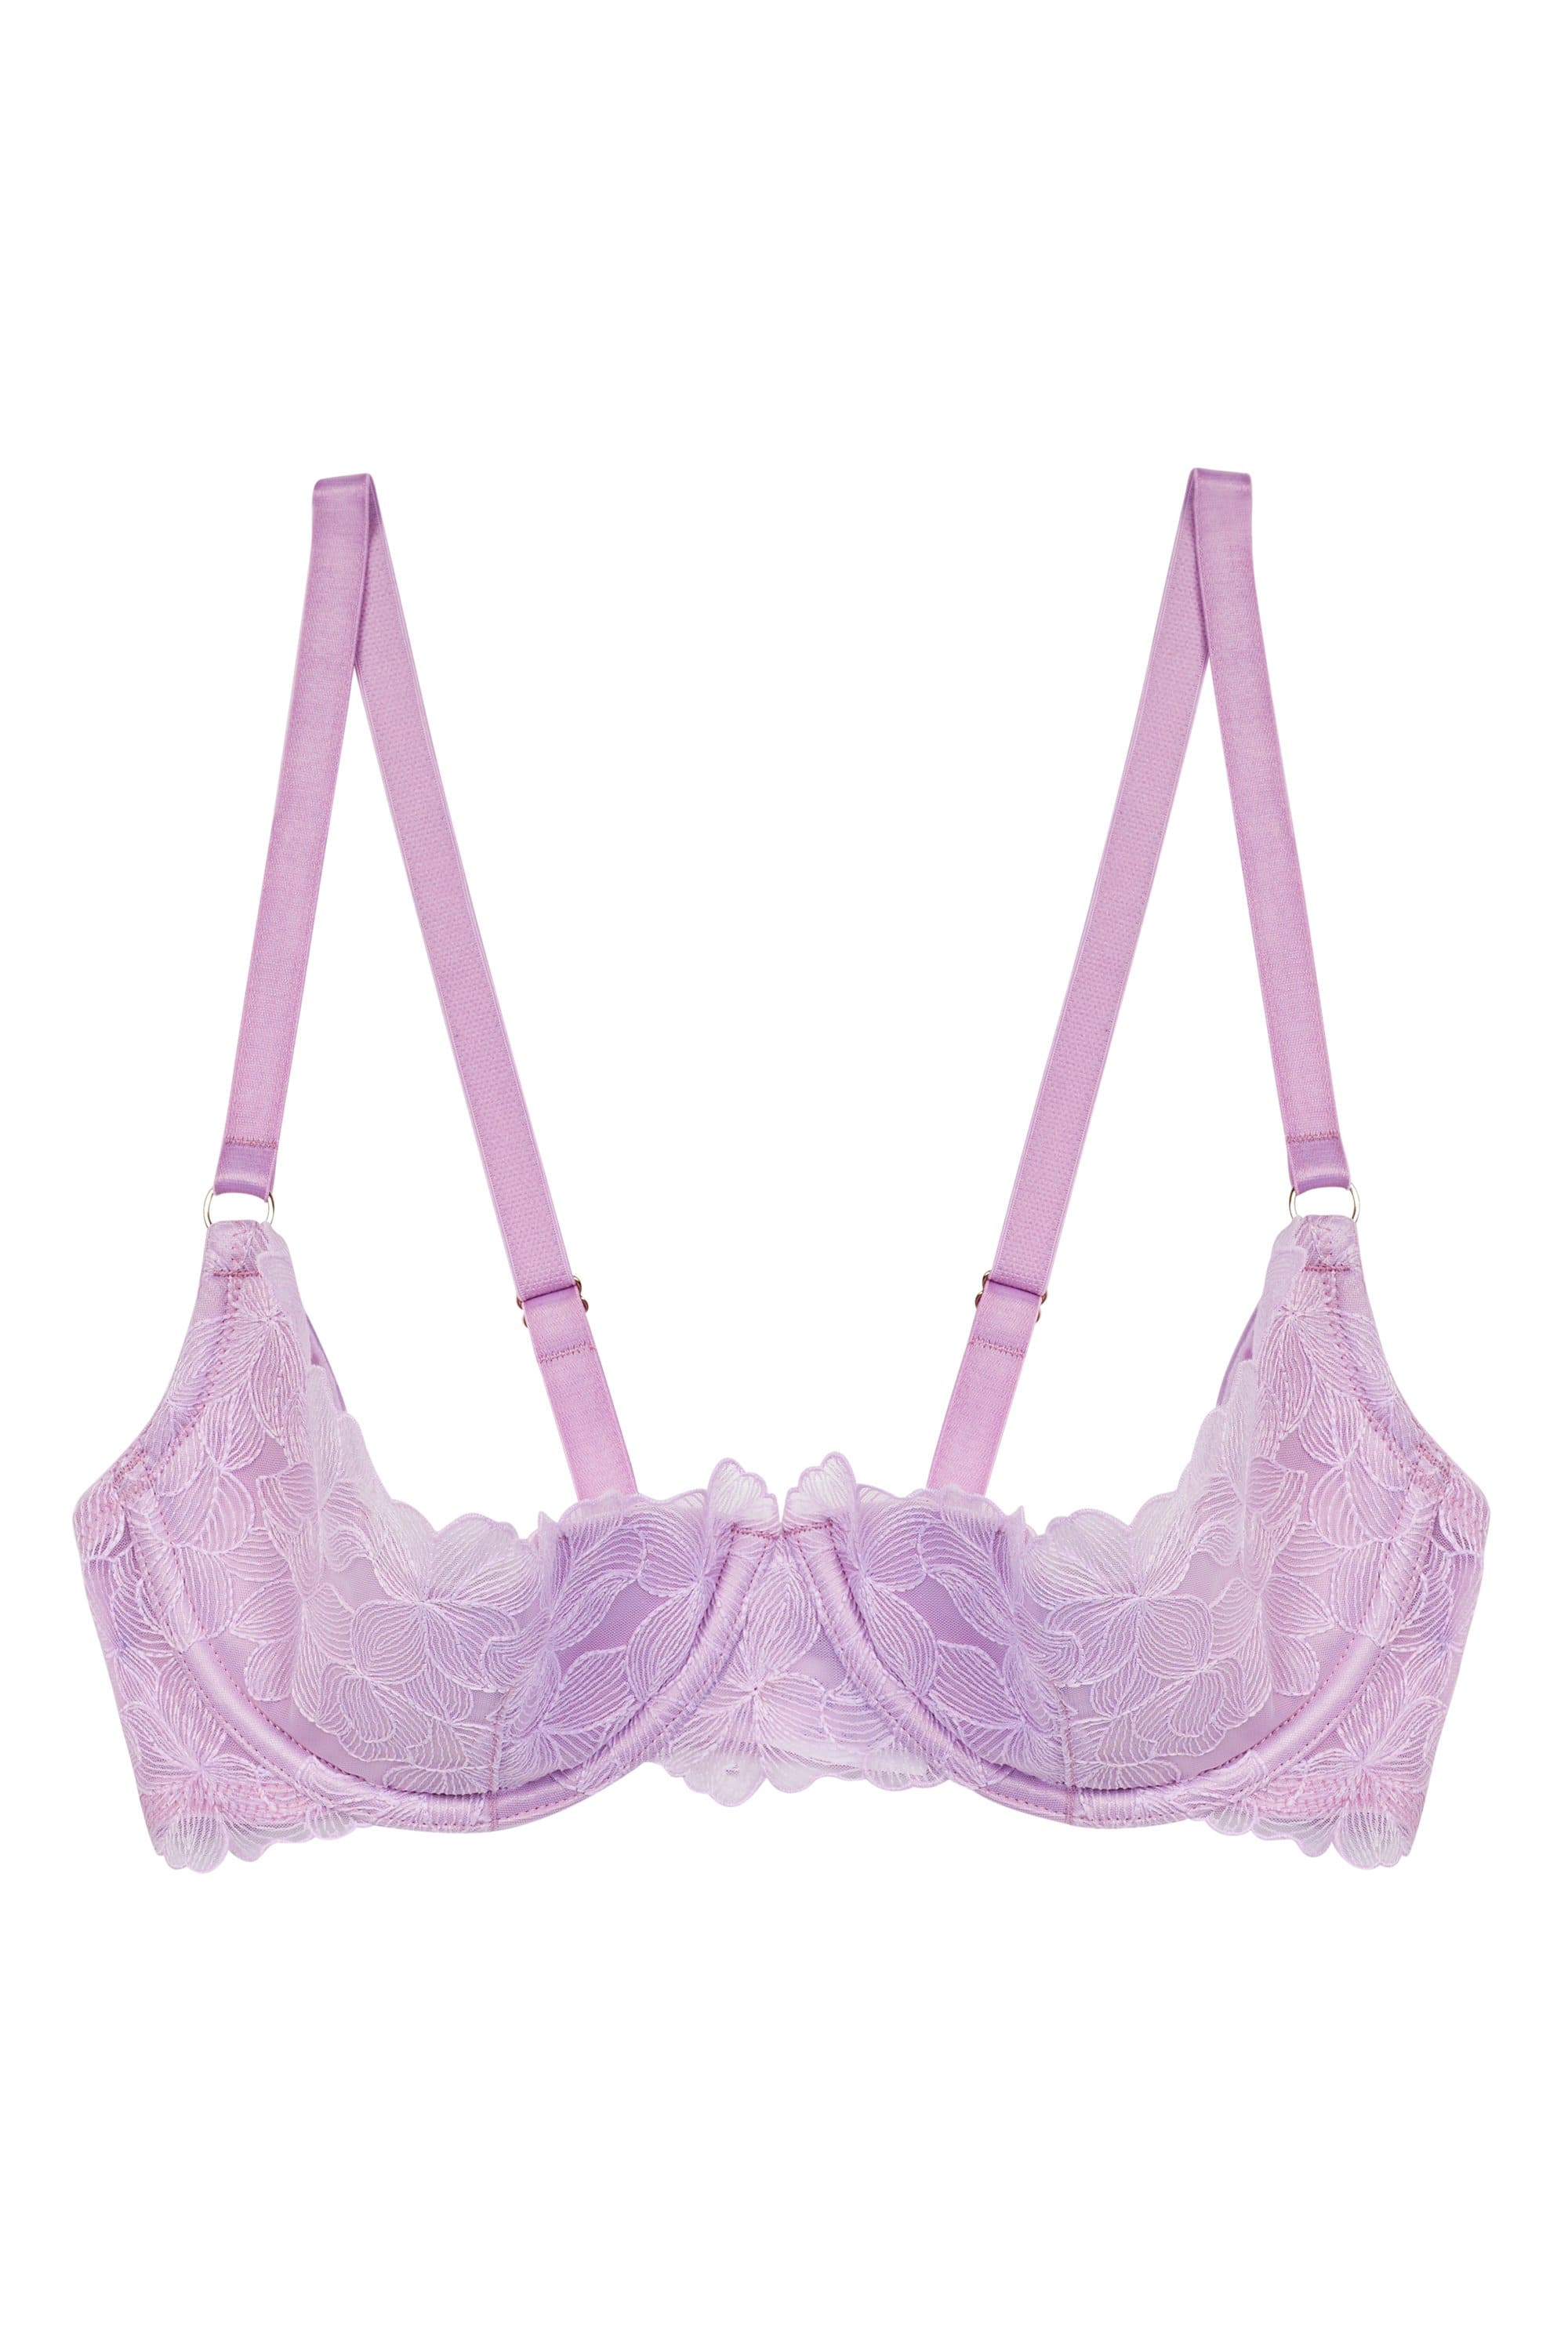 Lilac Lace Cupped Bra With Bow, Lingerie